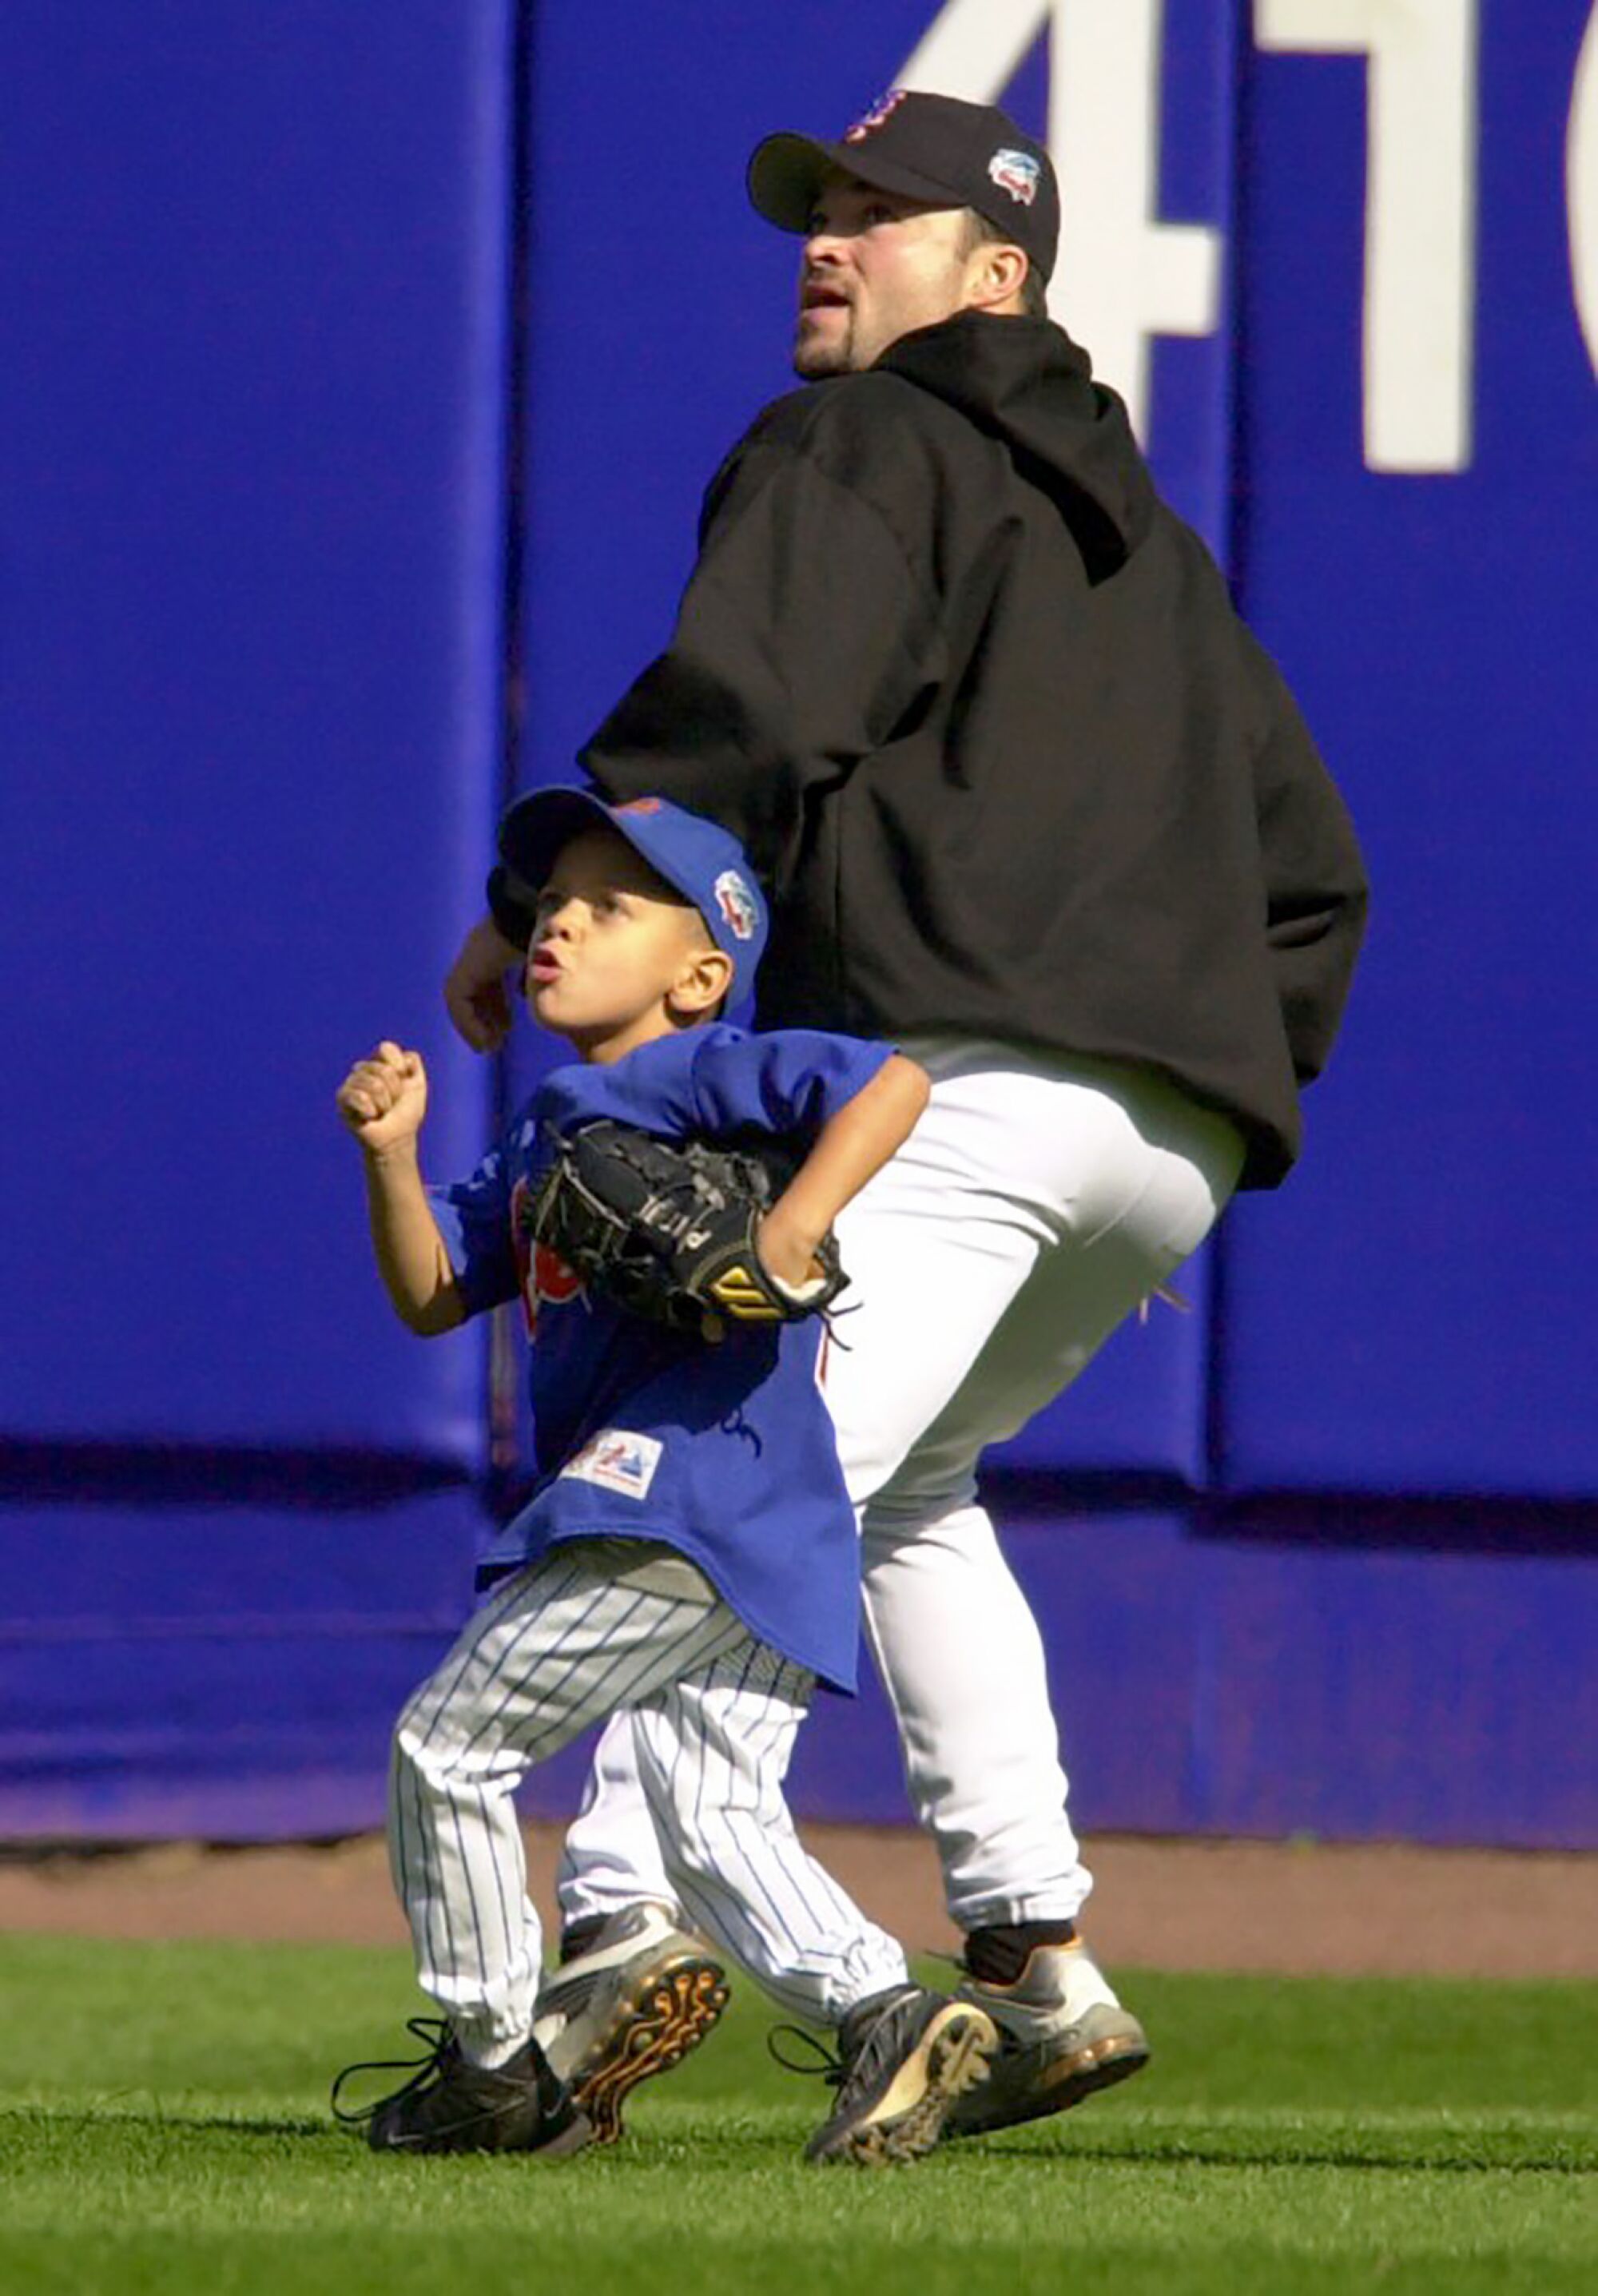 A young Patrick Mahomes tracks a fly ball with Mets pitcher Mike Hampton in 2000 